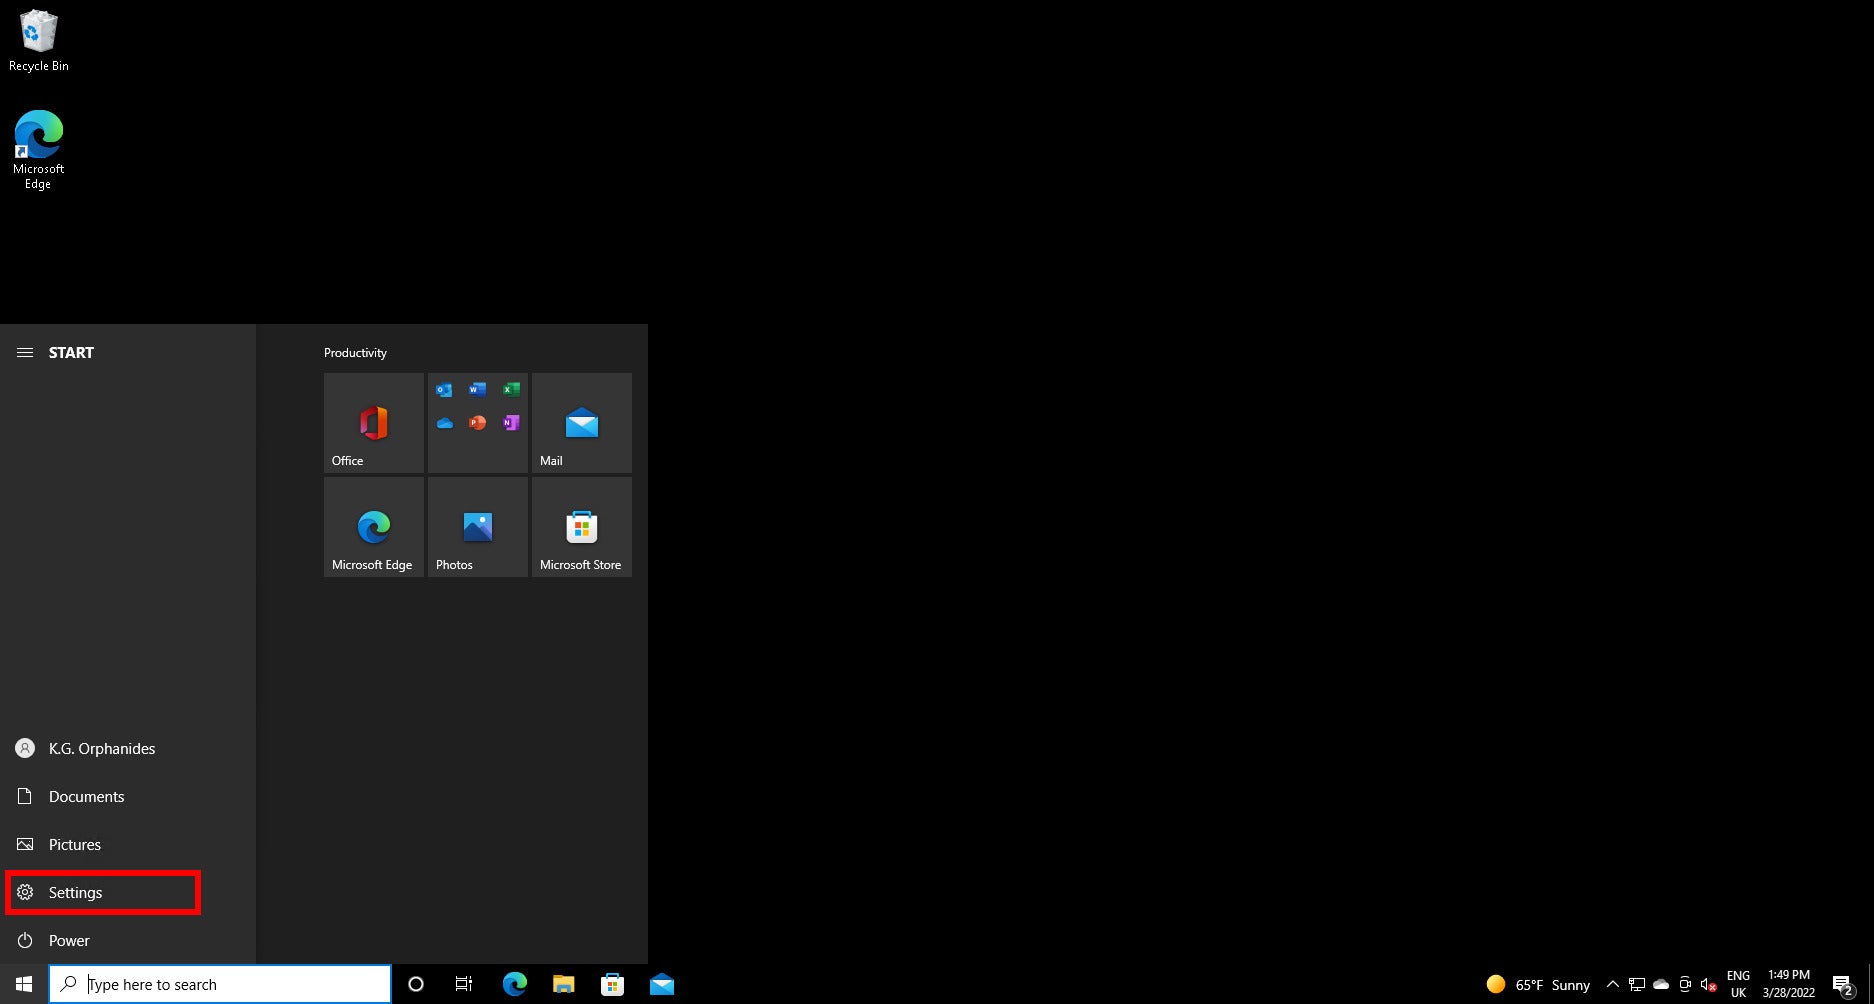 The settings option in the Start menu is highlighted